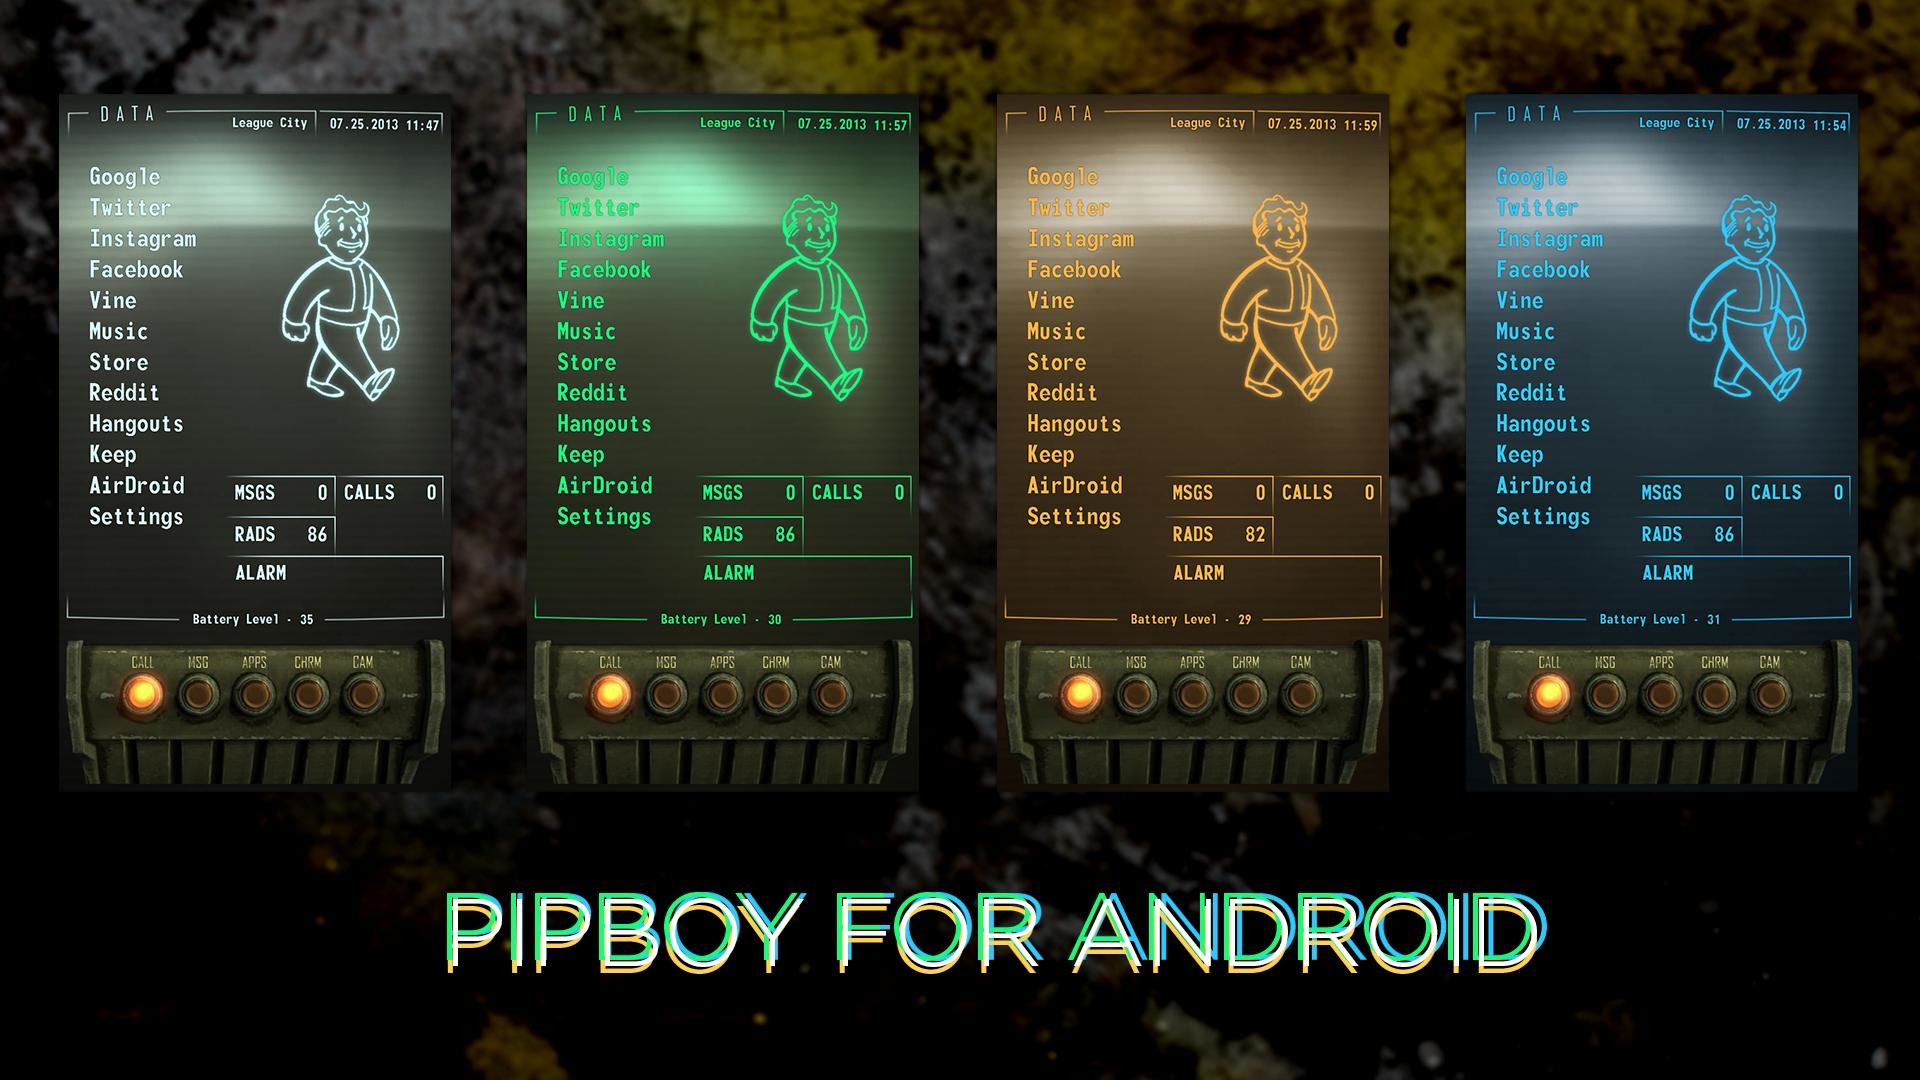 I give you my improved Fallout PipBoy Android theme x post from r / fallout